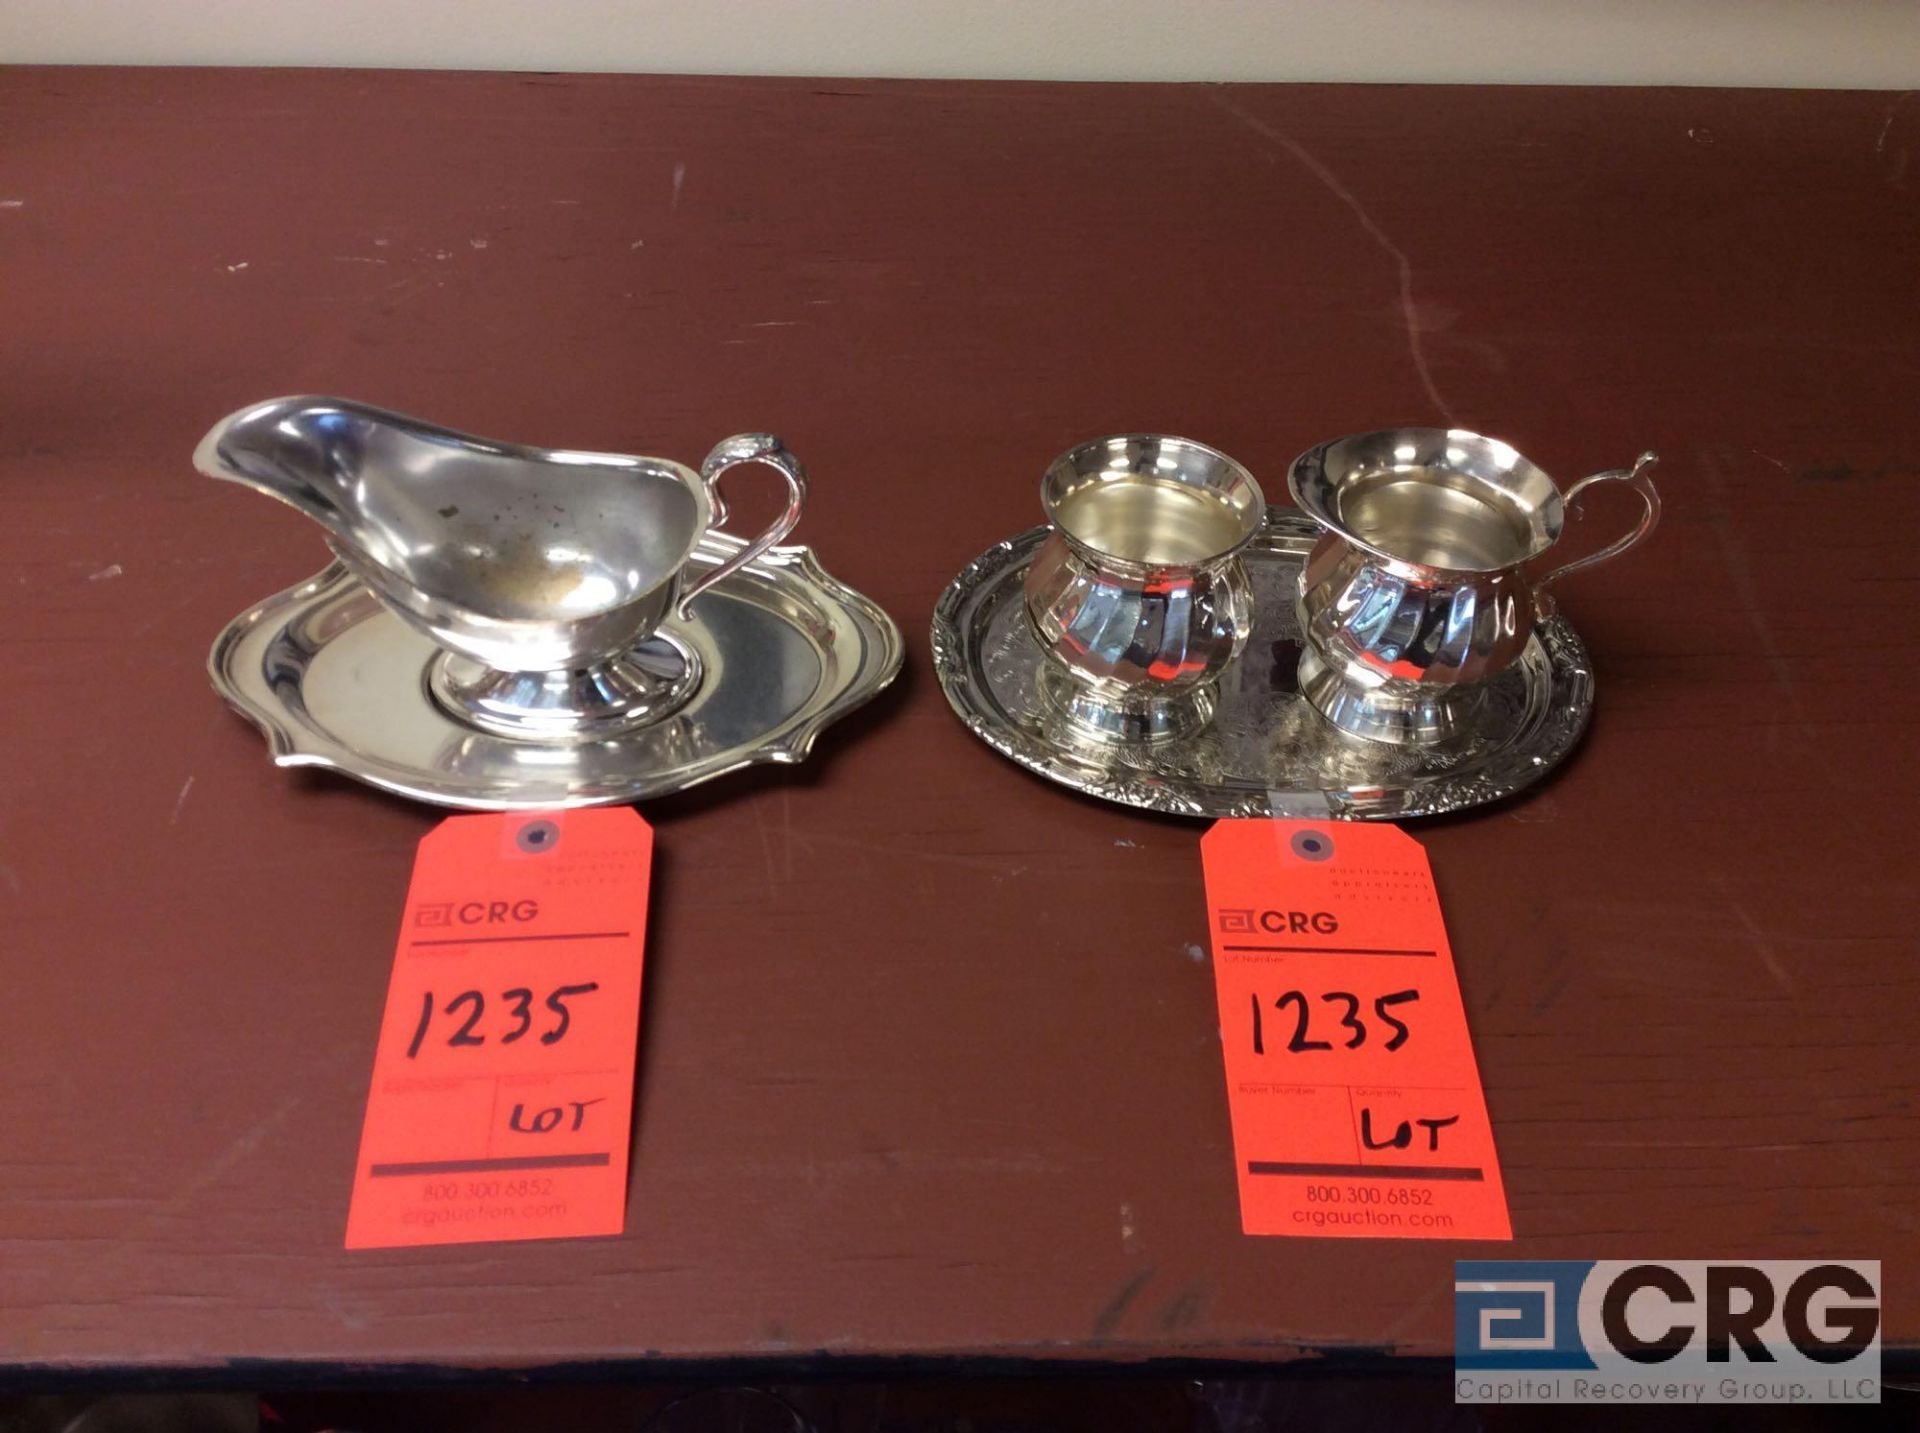 Lot of self service items including (103) silver plate 9 inch trays, (62) silver plate sugar bowls